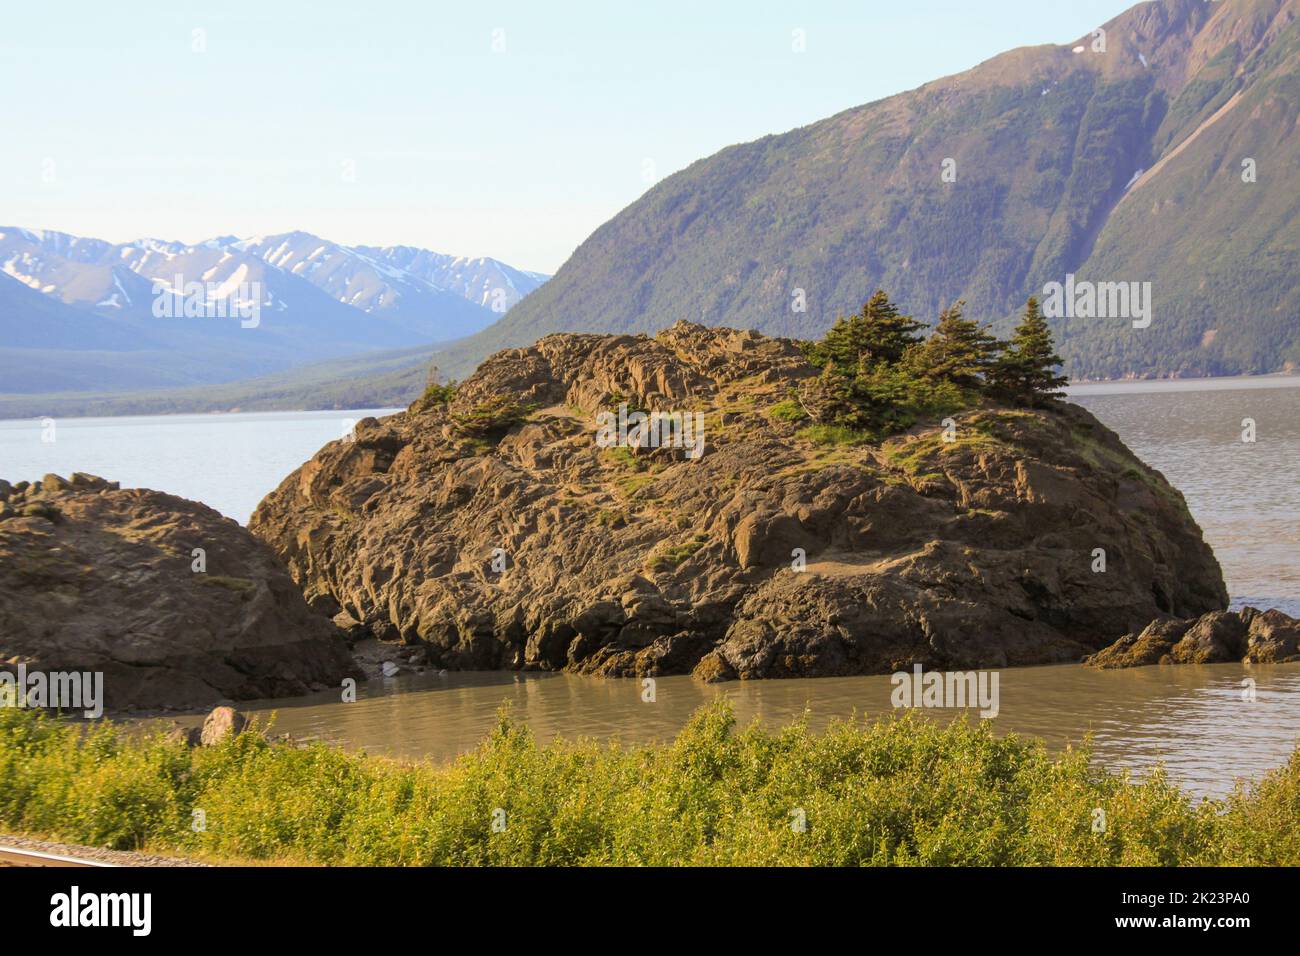 Cook Inlet landscape Photographed near Homer, Alaska. Homer is a city in Kenai Peninsula Borough in the U.S. state of Alaska. It is 218 mi (351 km) so Stock Photo